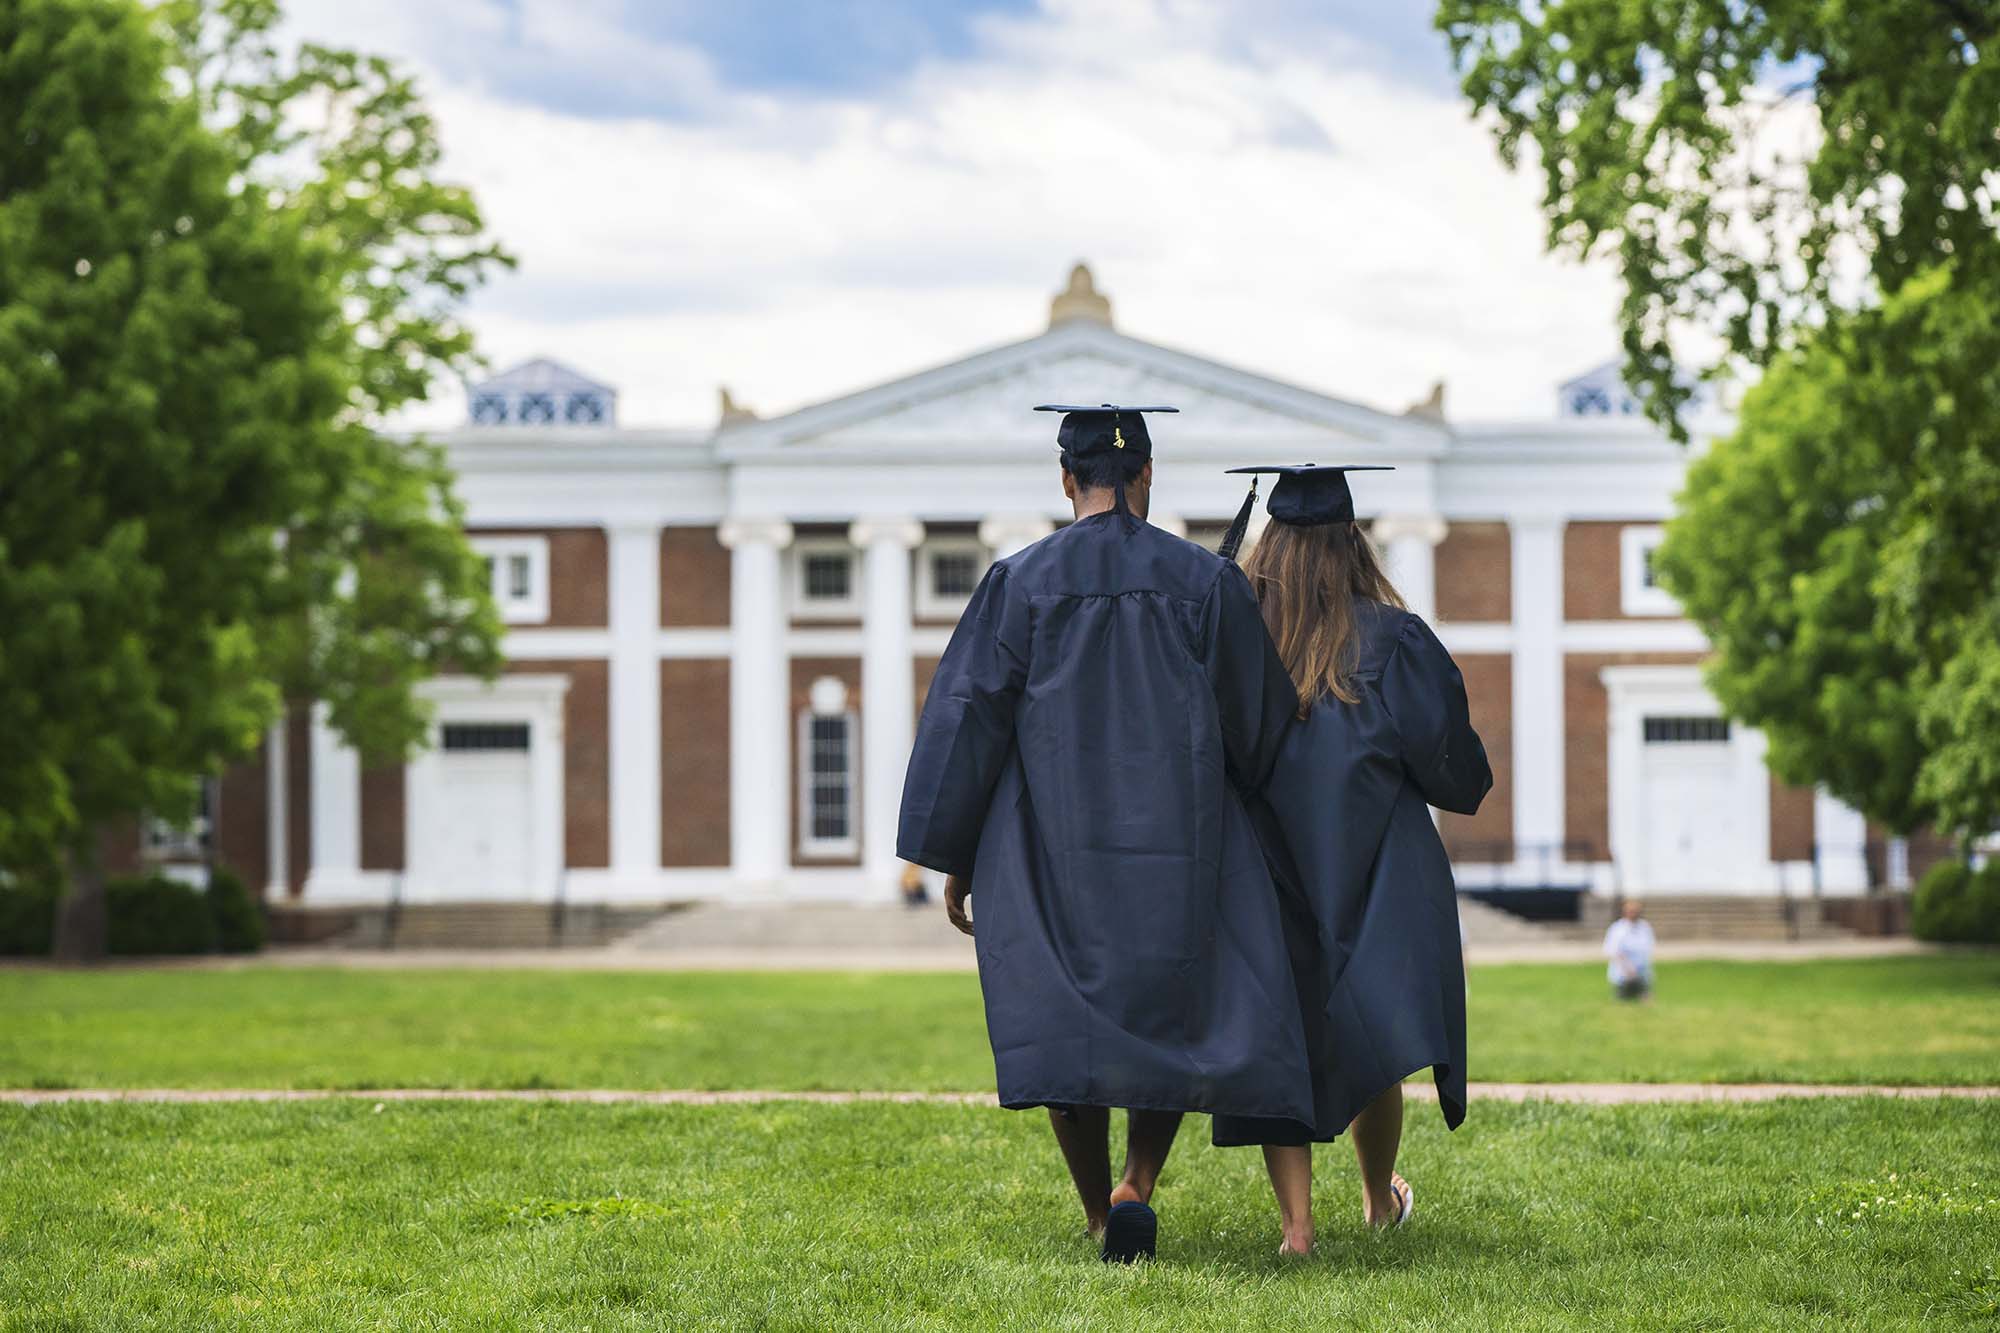 Historic Graduation Plans for Classes of 2020, 2021 Kick Off This